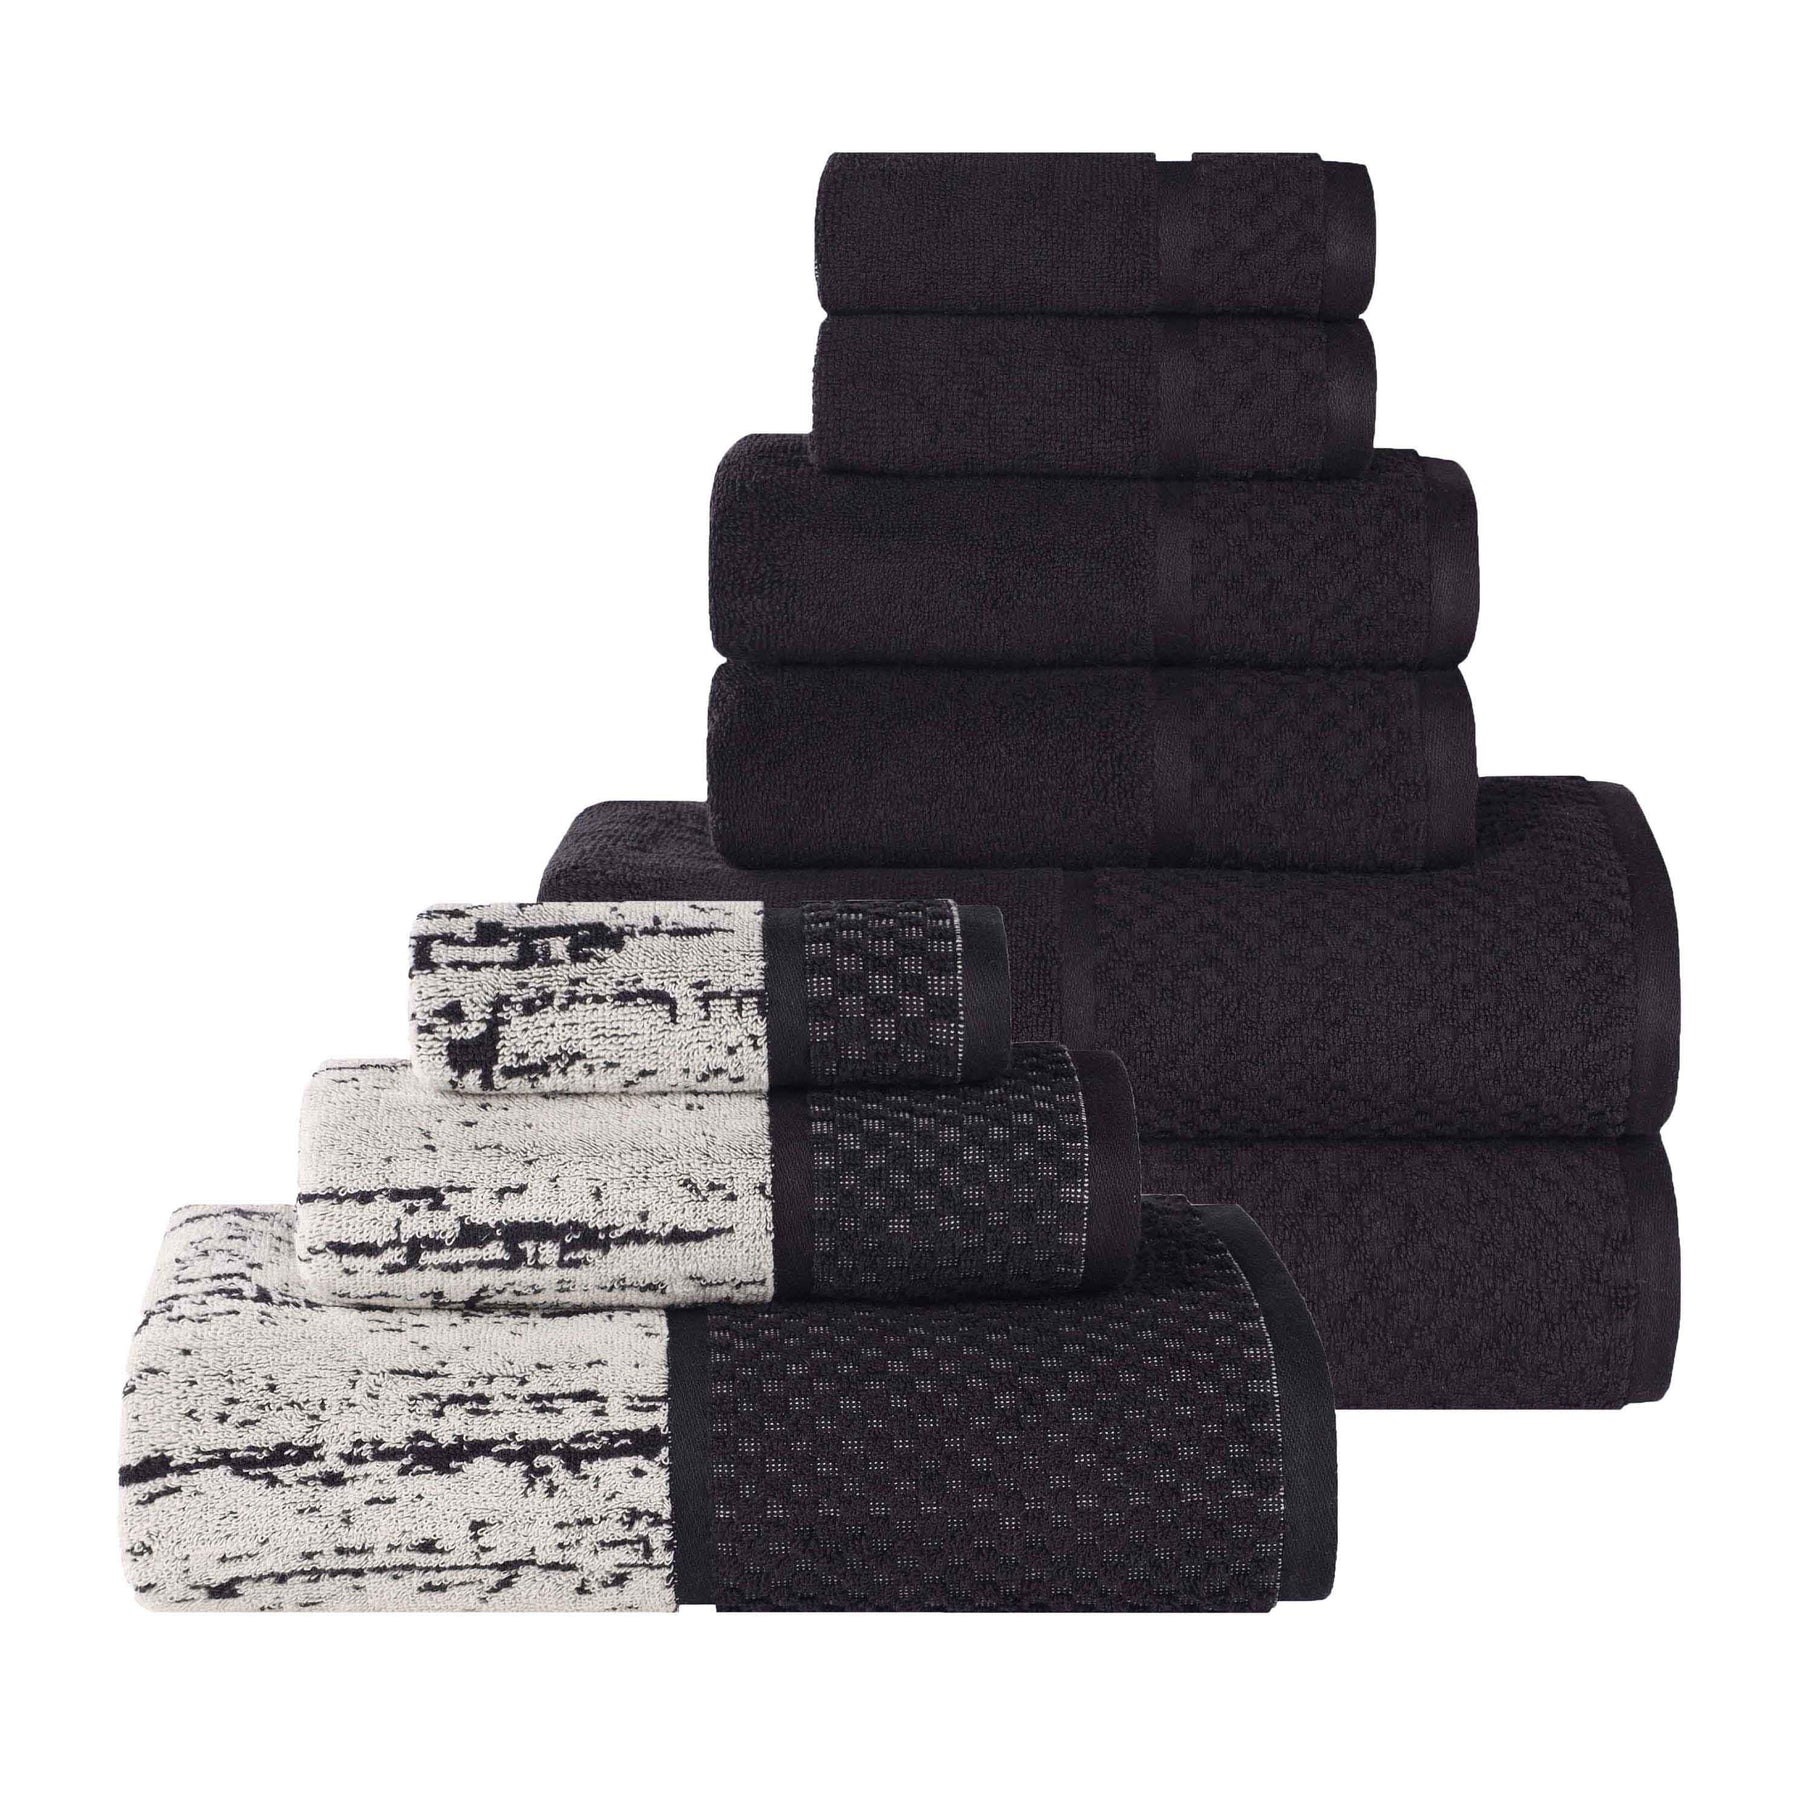 Lodie Cotton Jacquard Solid and Two-Toned 9 Piece Assorted Towel Set - Black-Ivory